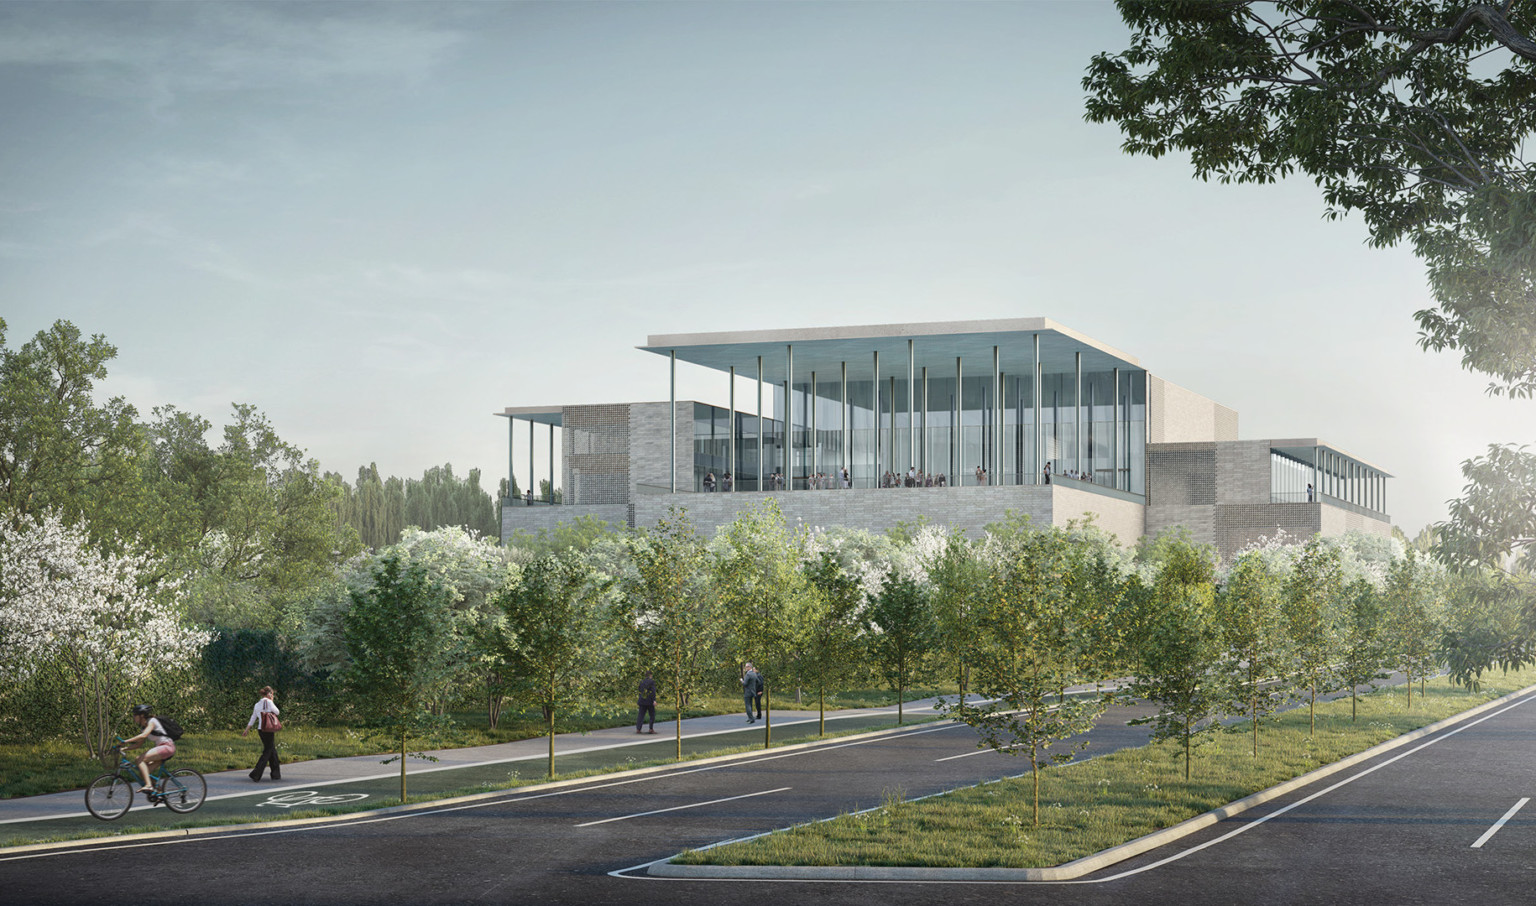 rendering of world's seventh ismaili center; a glass and stone building with a second level terrave overlooking a green park